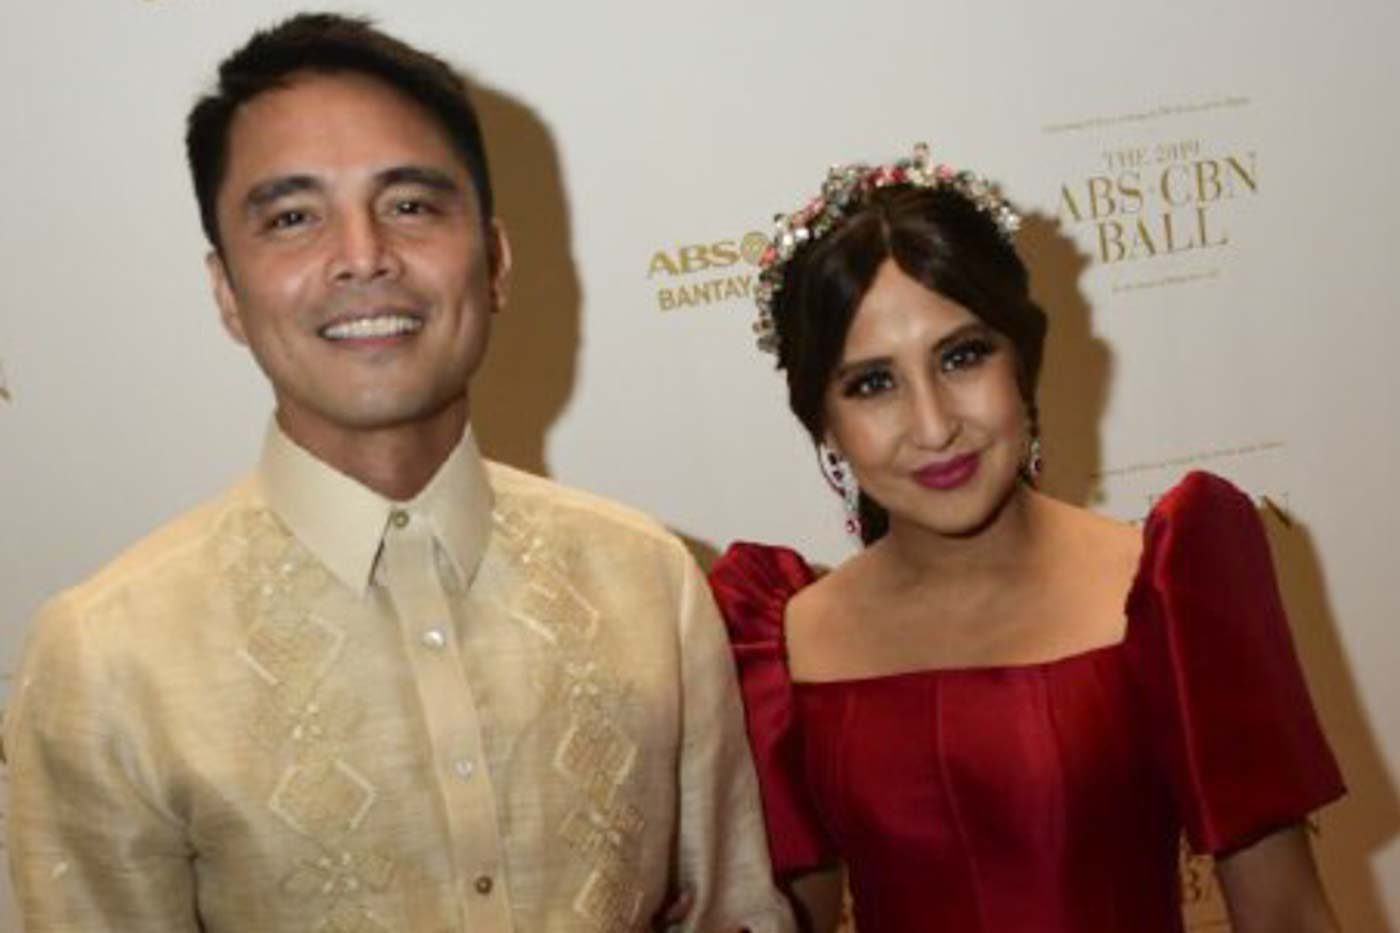 LOOK: Marvin Agustin and Jolina Magdangal at the ABS-CBN Ball 2019 is the 90s reunion we all deserve